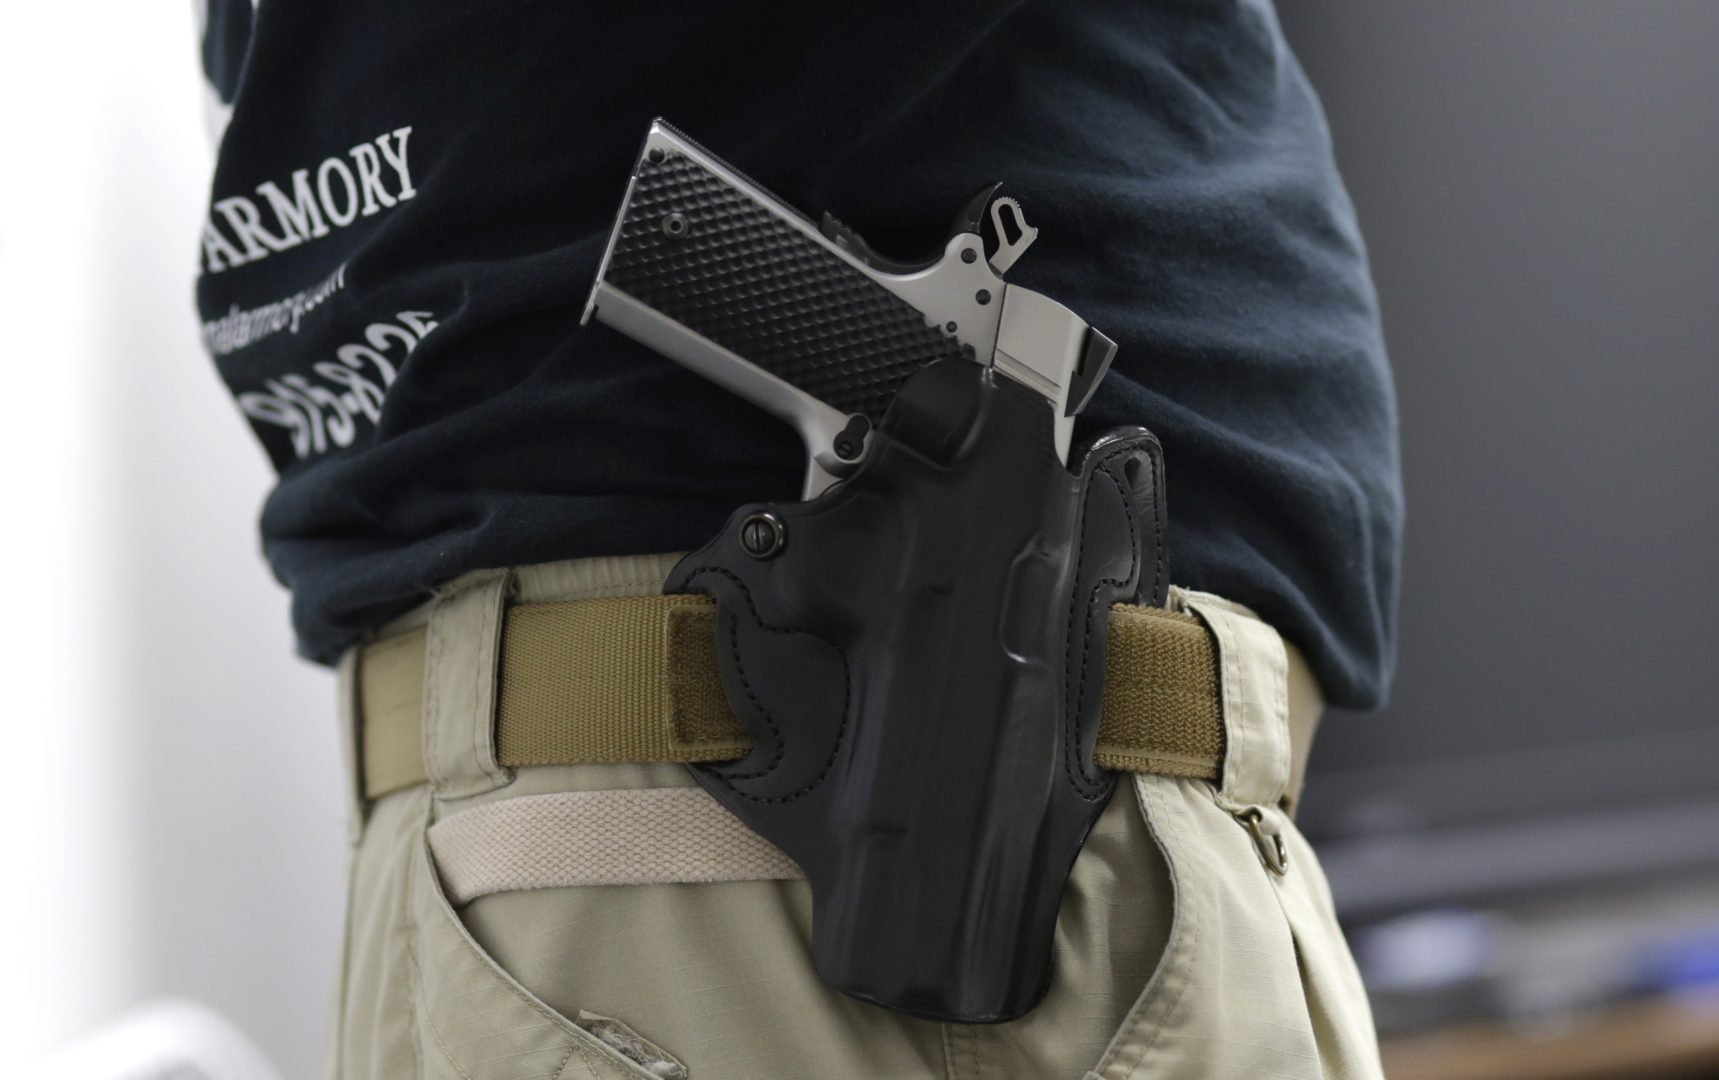 Pennsylvania voters overwhelmingly oppose dropping concealed-carry